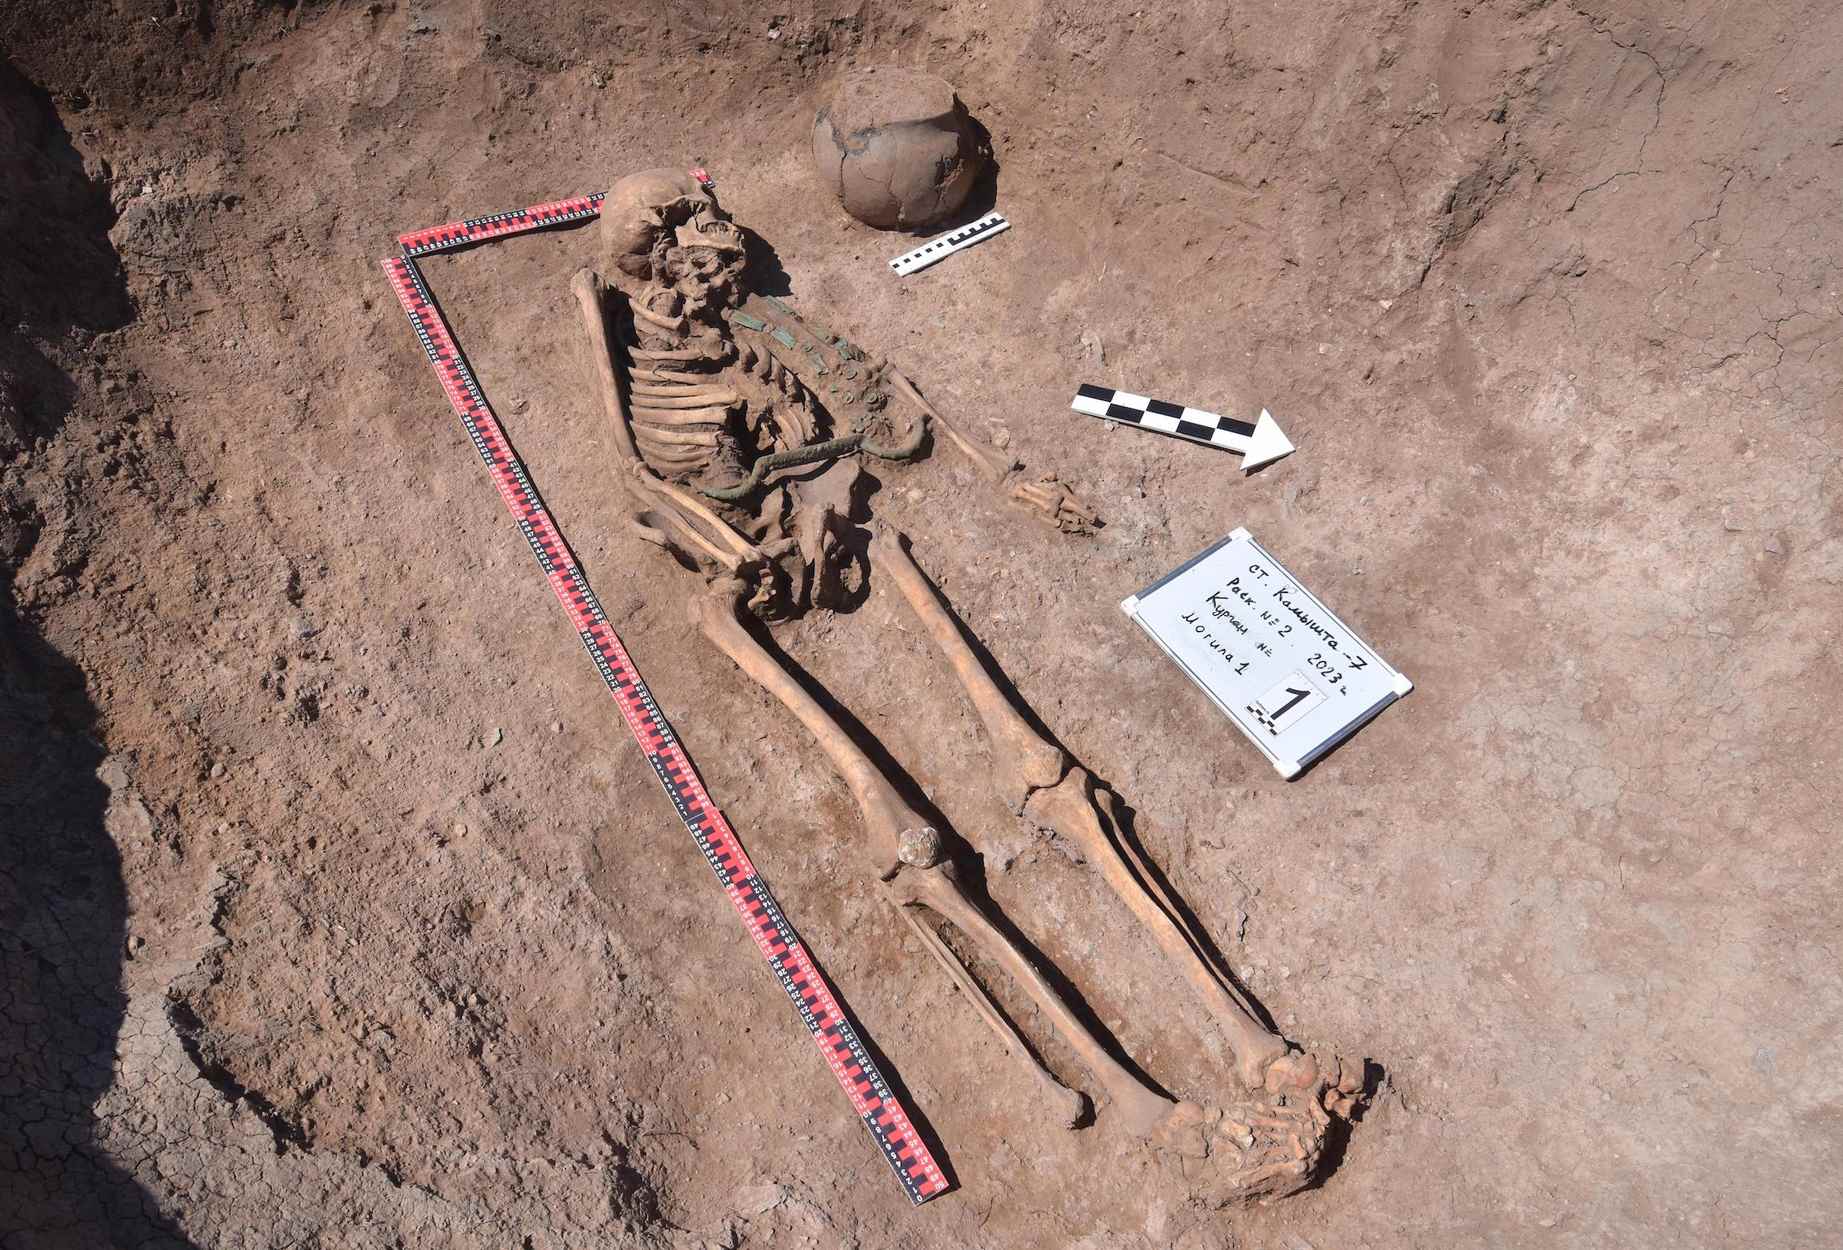 The tomb contained a Siberian charioteer along with grave goods, including a bronze belt piece, dagger and jewelry.